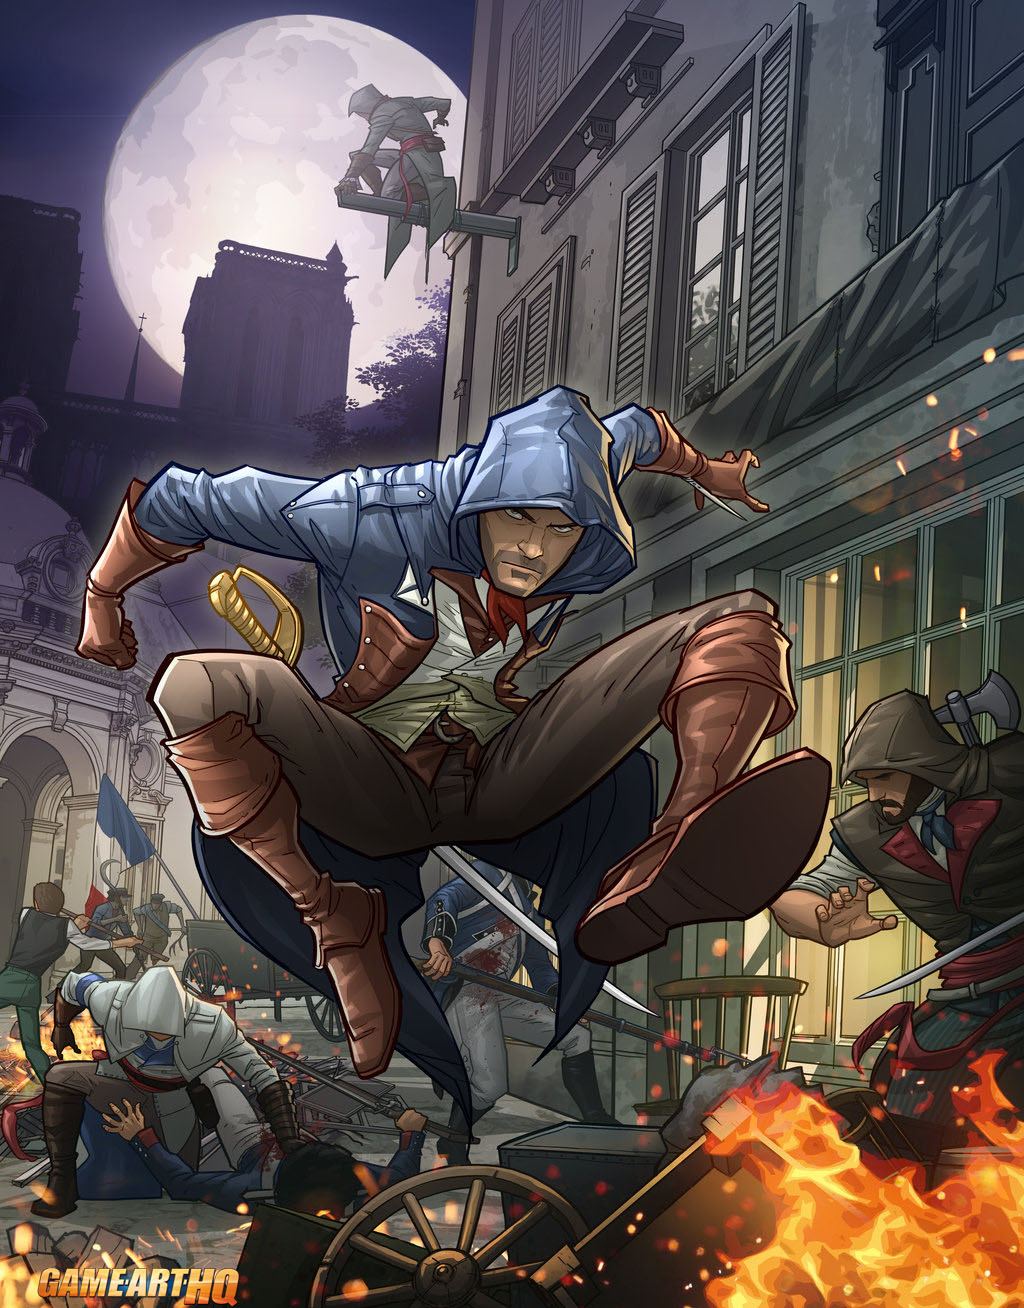 Bedrag appetit Ydmyge Assassin's Creed Unity Art | Game-Art-HQ